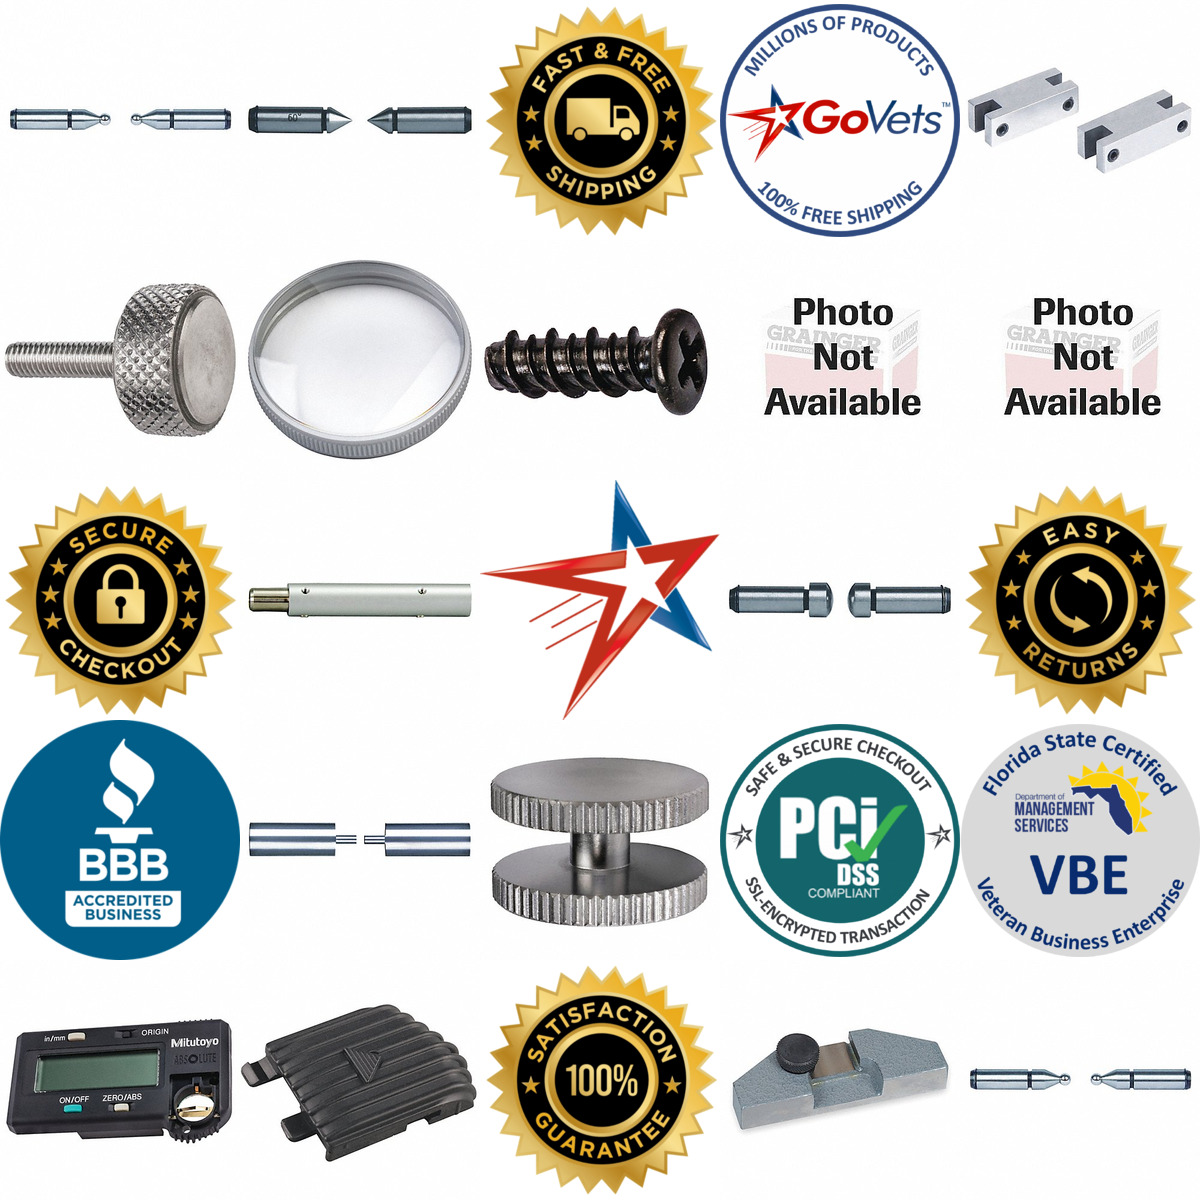 A selection of Caliper Accessories products on GoVets